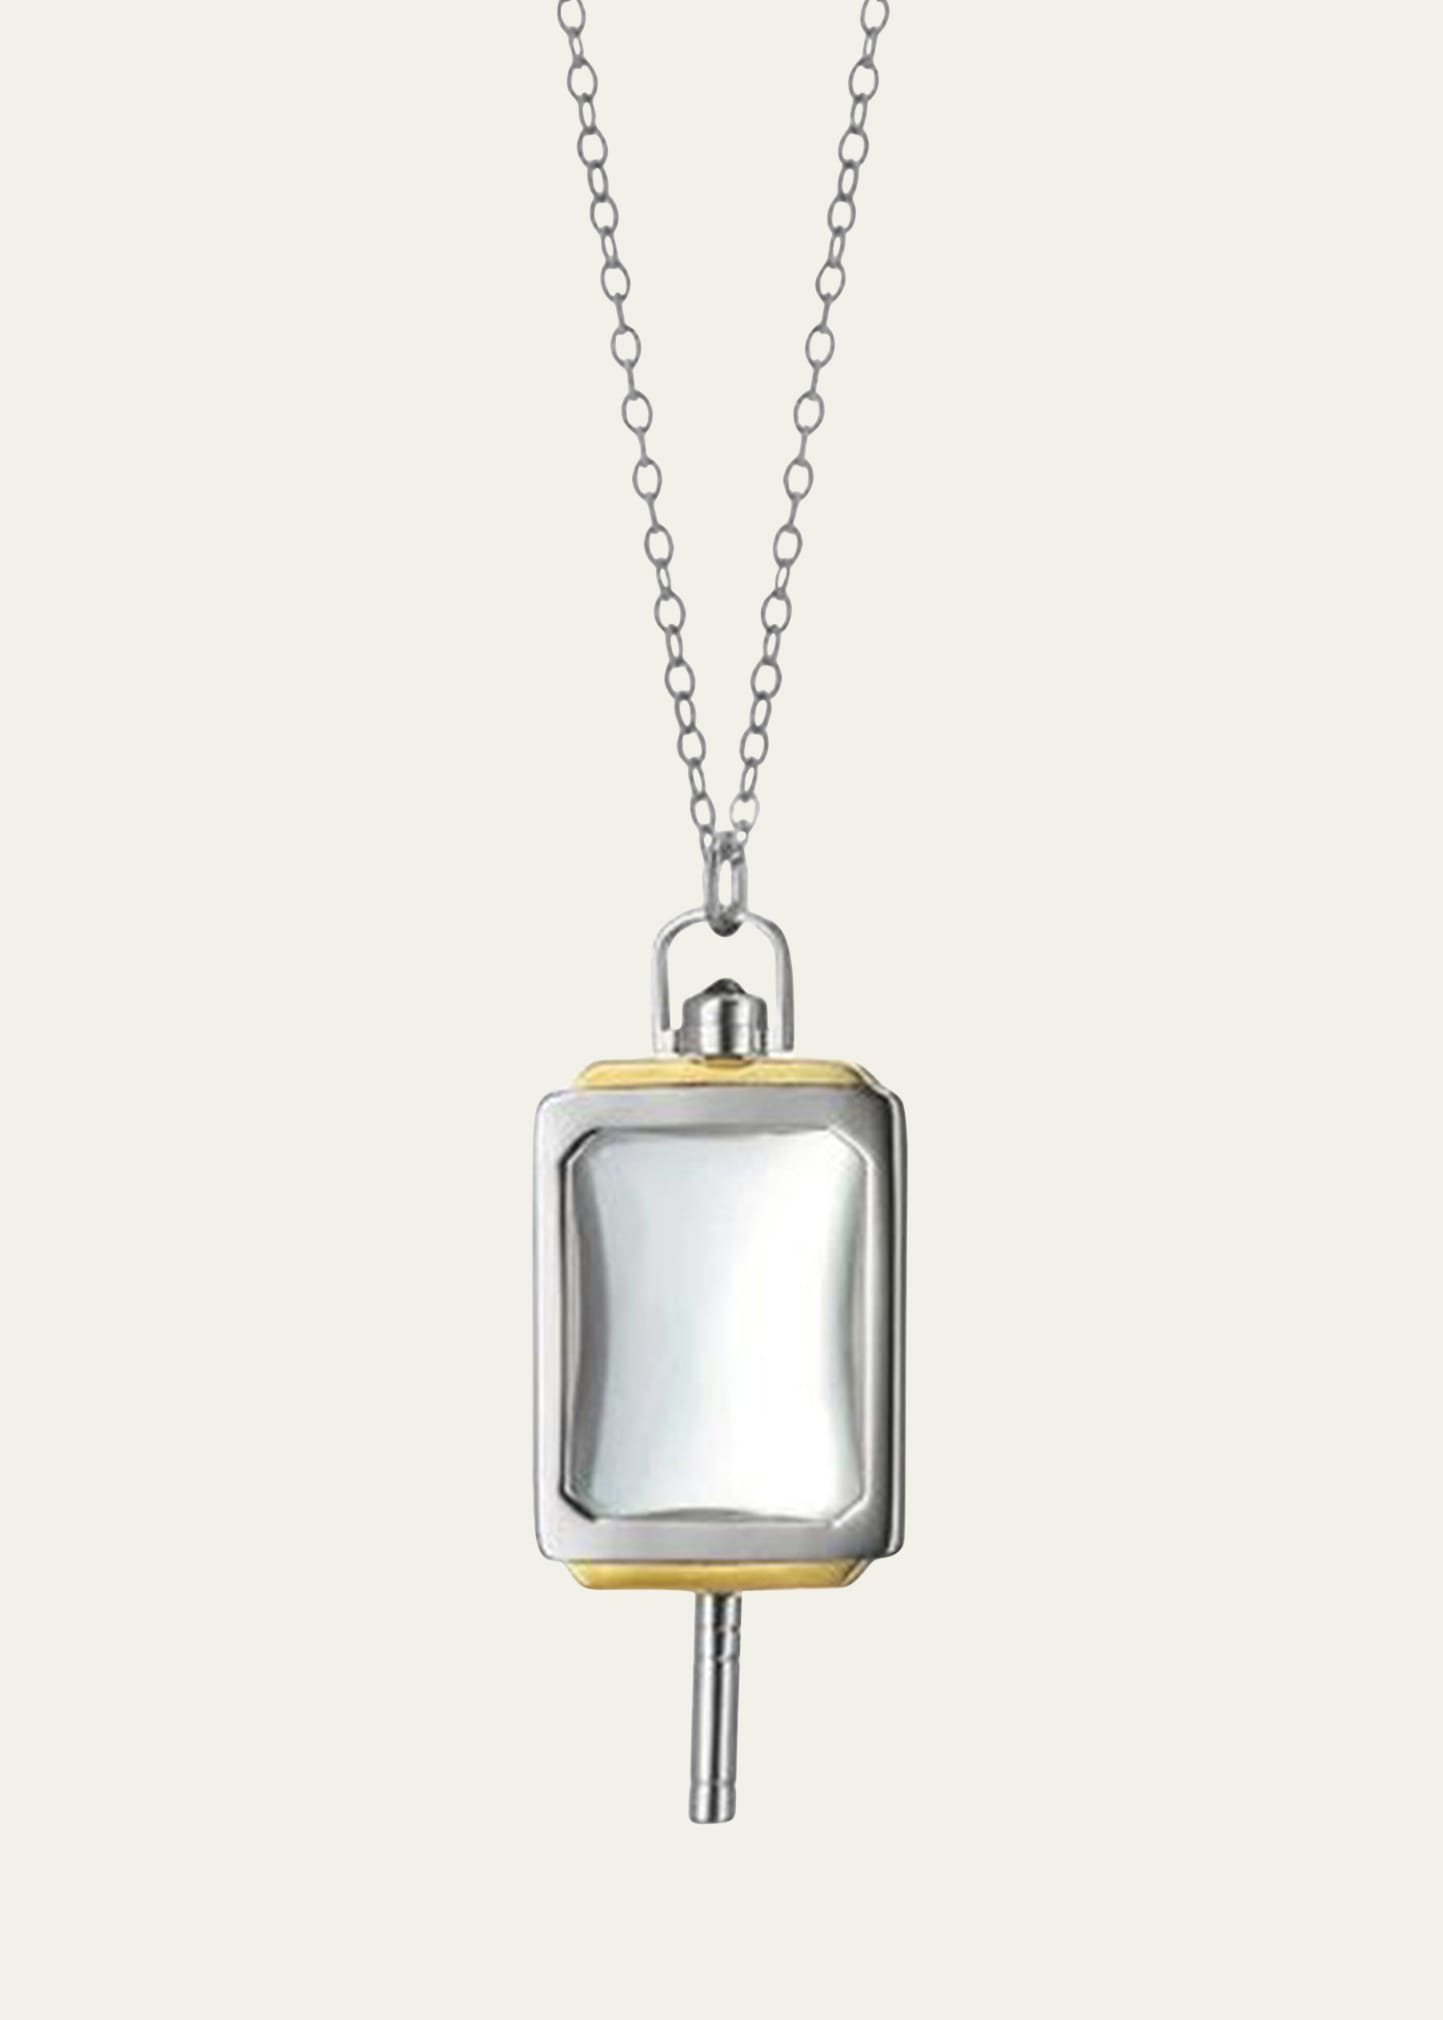 Silver & 18k Yellow Gold Rectangle Pocket Watch Key Pendant Necklace, 32"